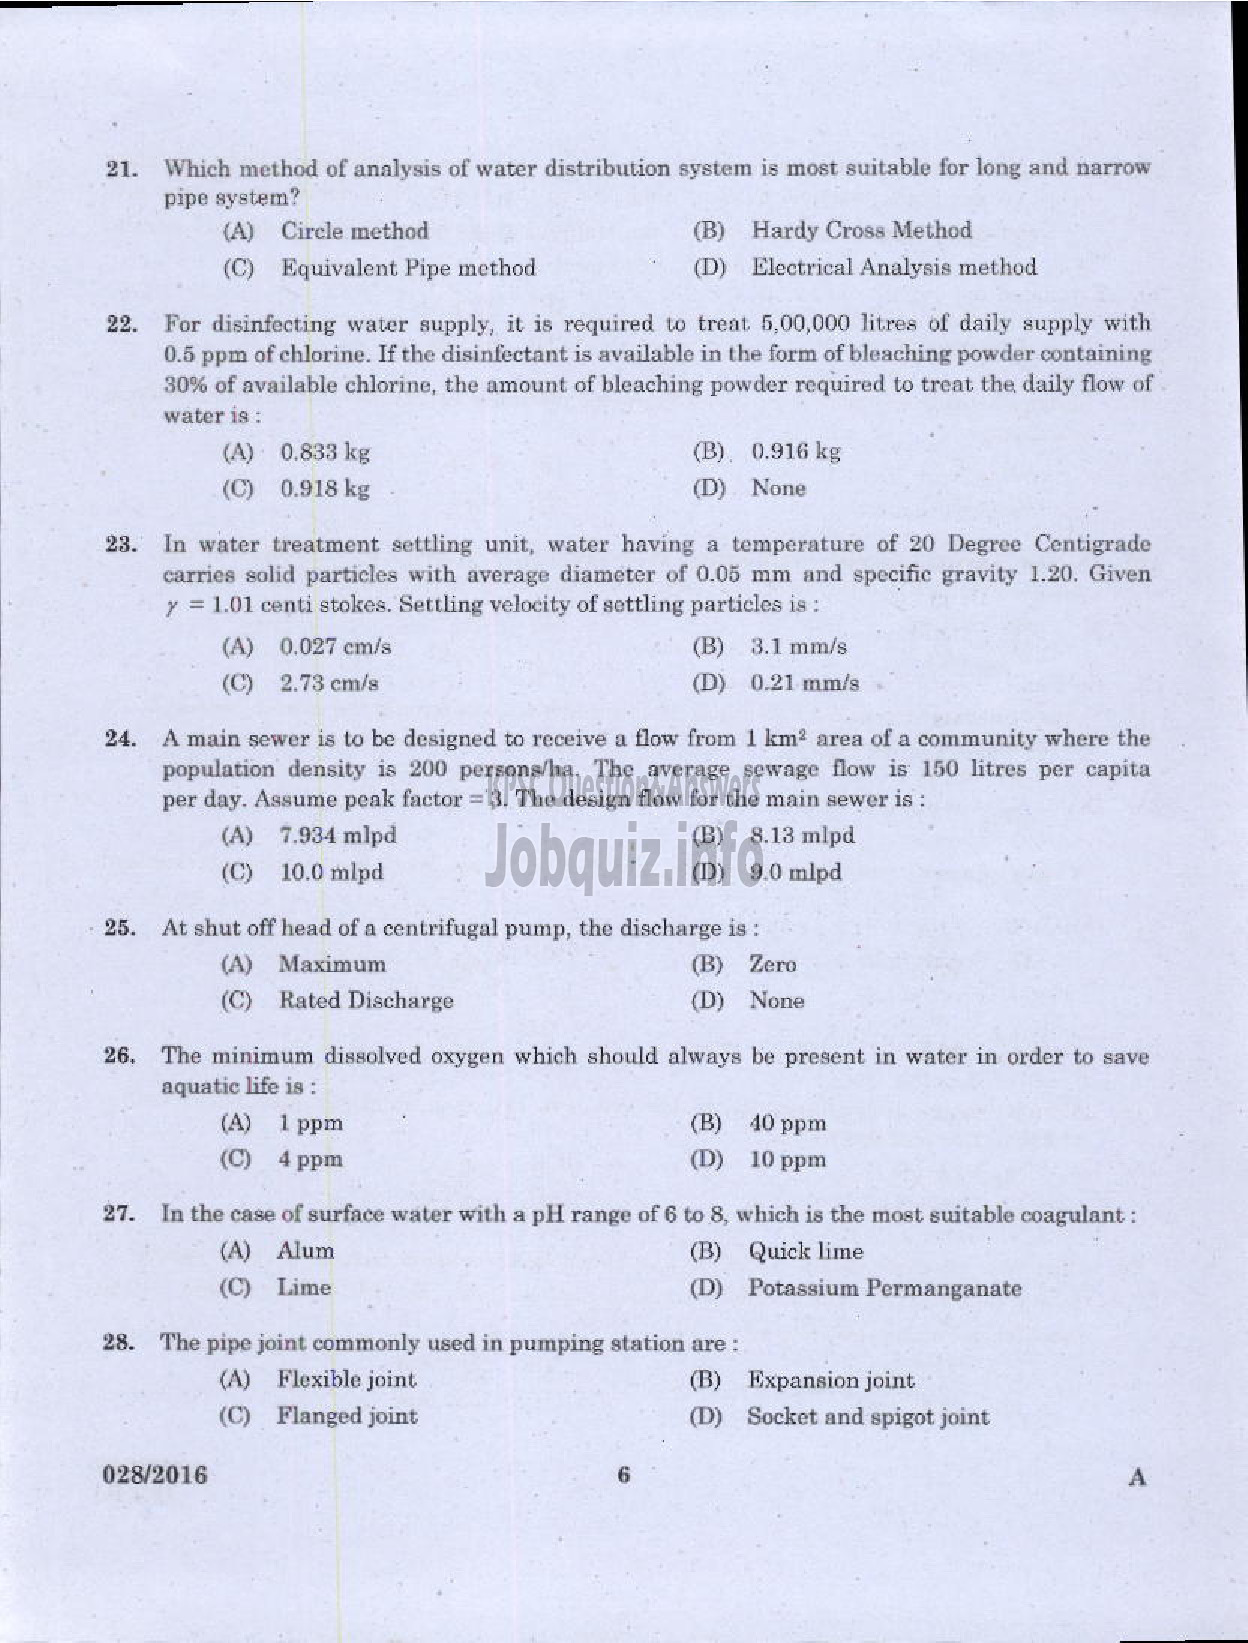 Kerala PSC Question Paper - ASSISTANT ENGINEER DIRECT/BY TRANSFER KERALA WATER AUTHORITY-4